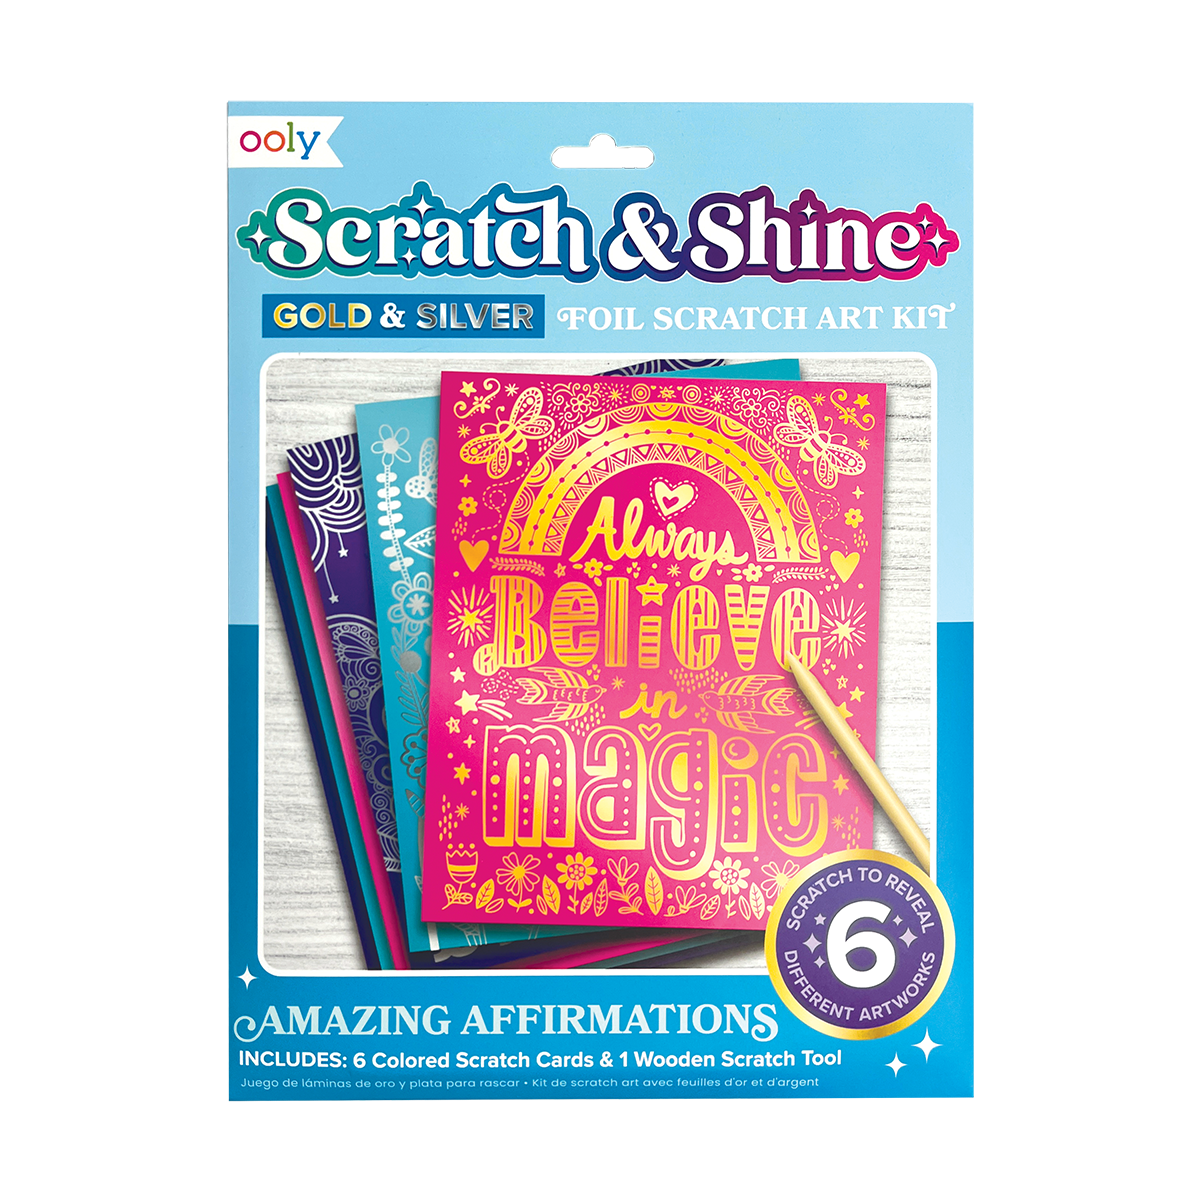 OOLY Scratch and Shine Foil Scratch Art Kit - Amazing Affirmations in packaging